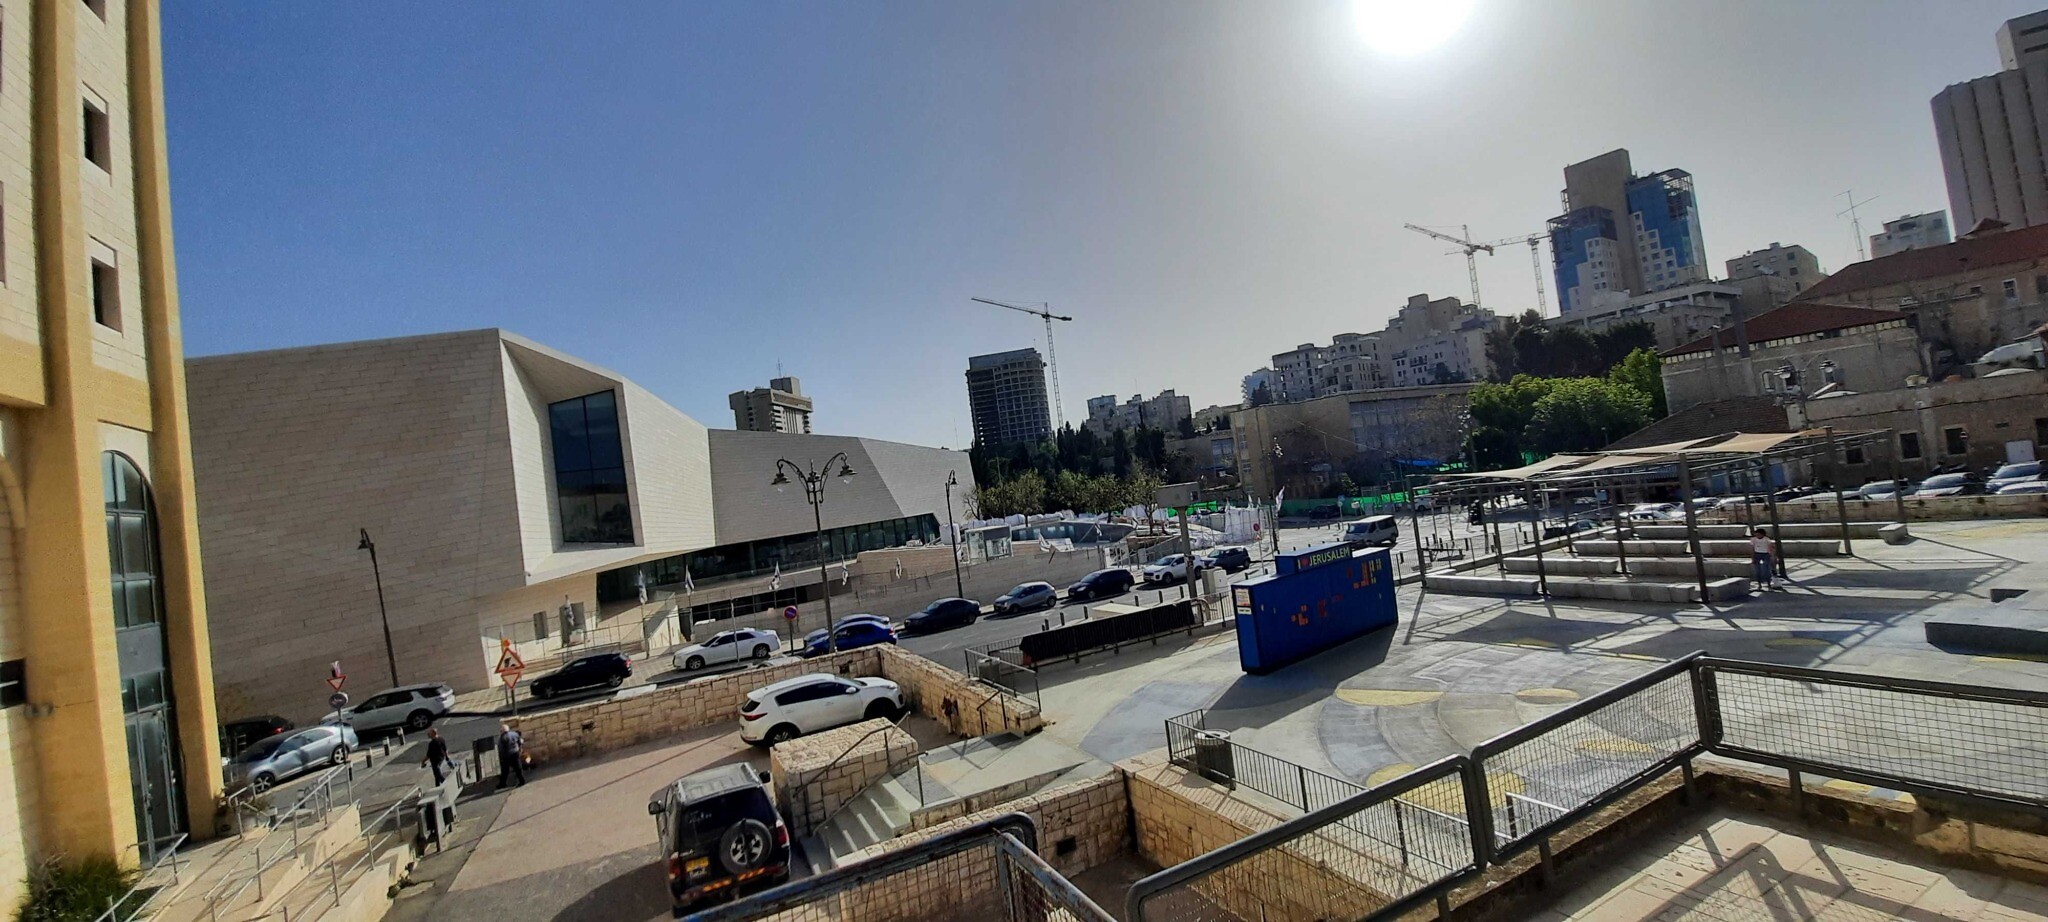 A view of the under-construction Museum of Tolerance Jerusalem on April 5, 2021. (Joshua Davidovich/Times of Israel)